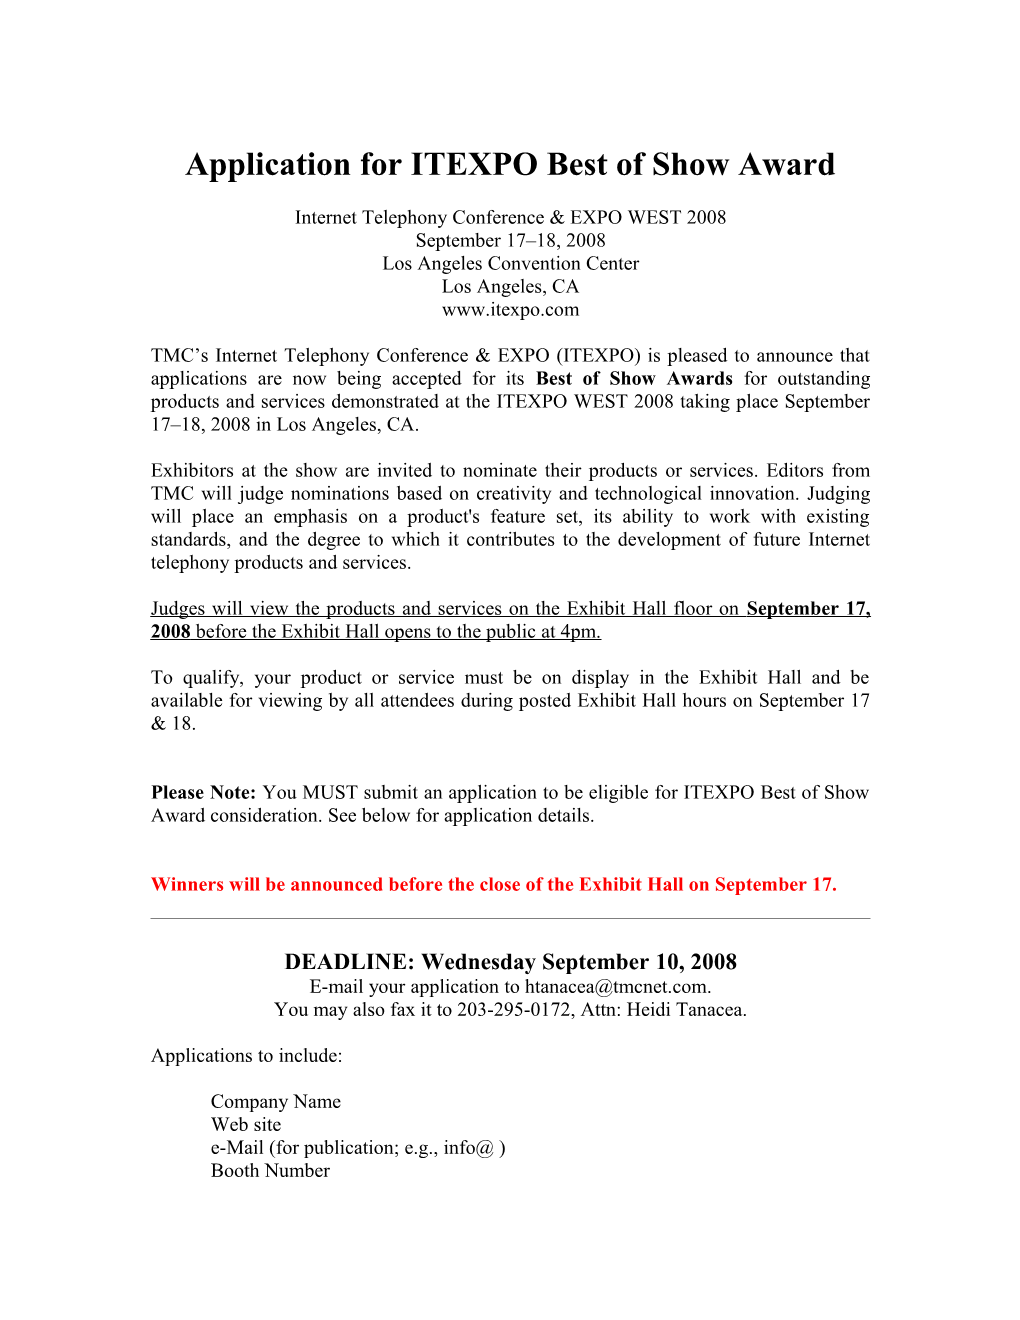 Application for Best of Show Award